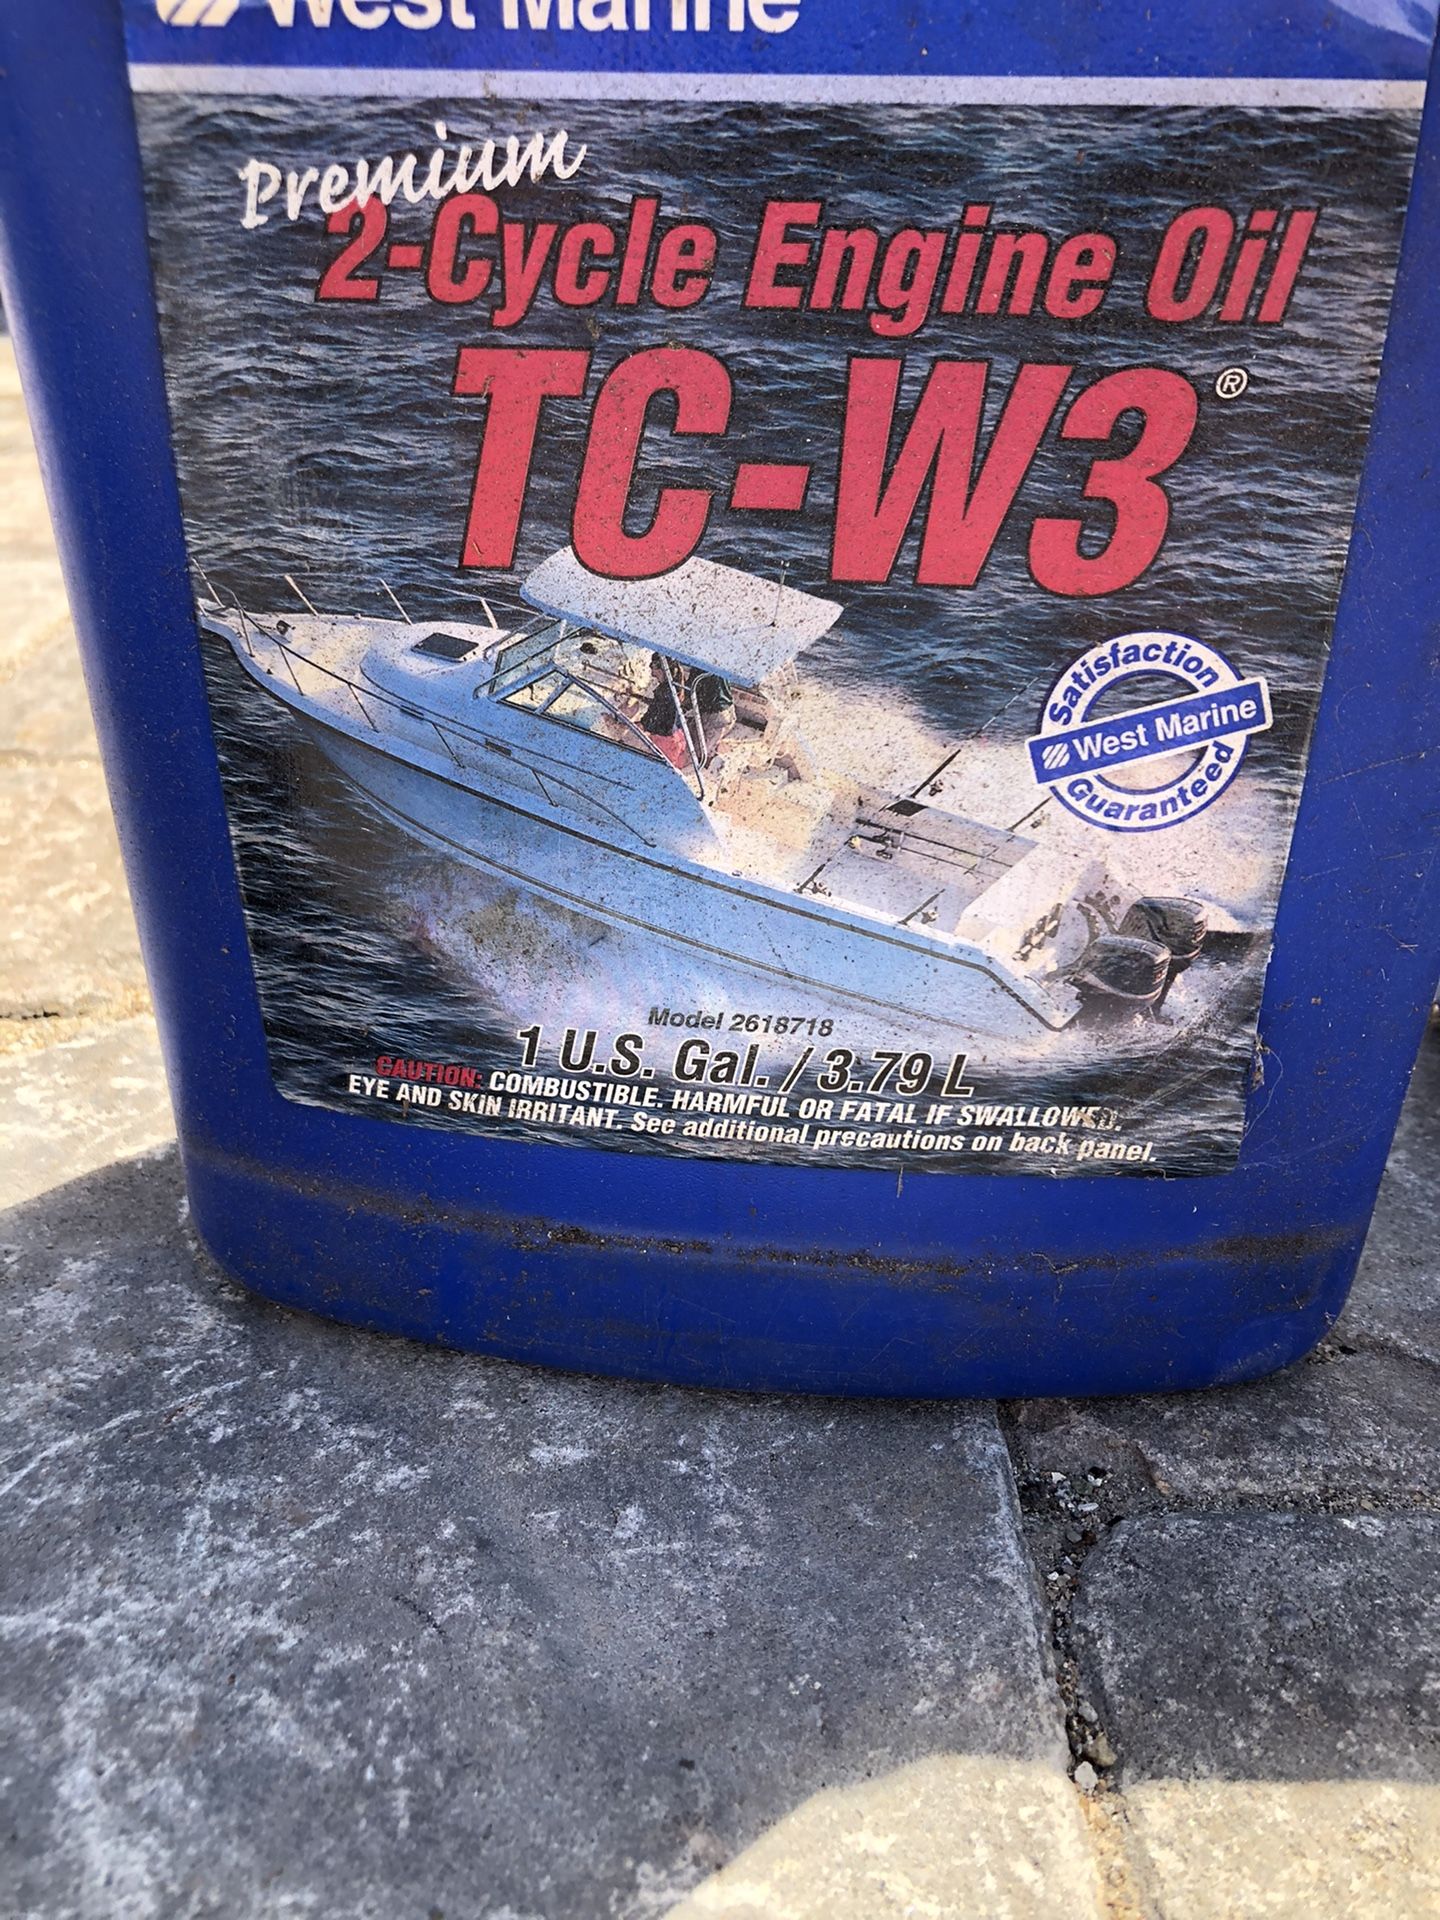 3 gallons of marine oil